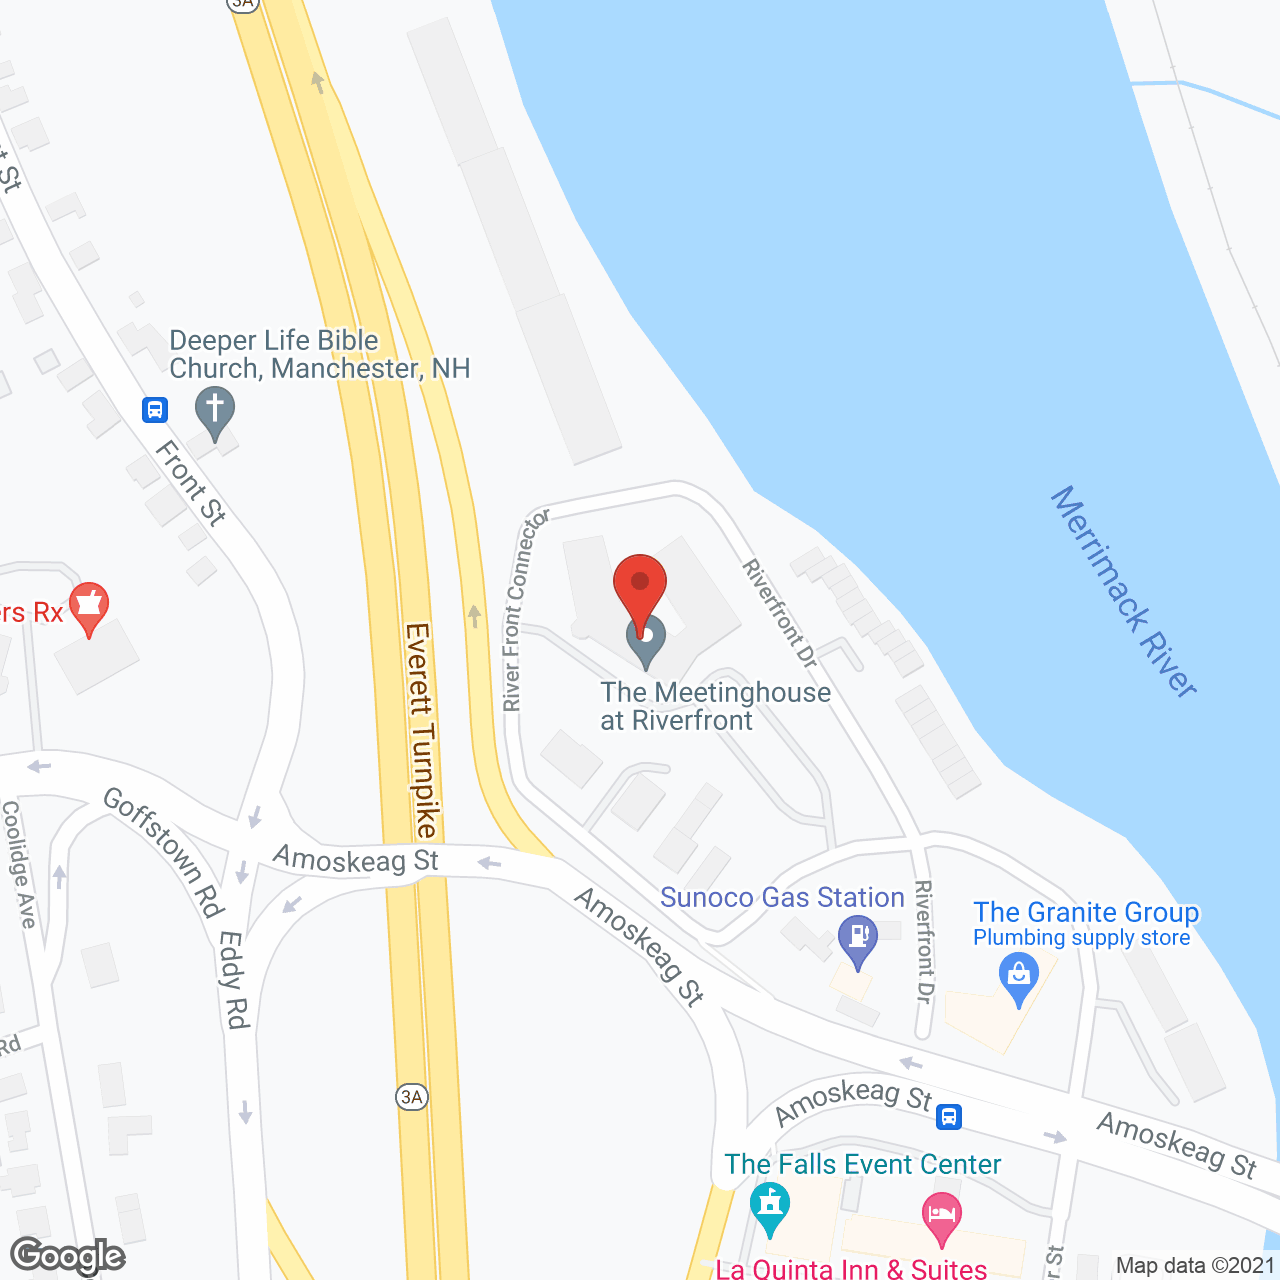 Meetinghouse at Riverfront in google map